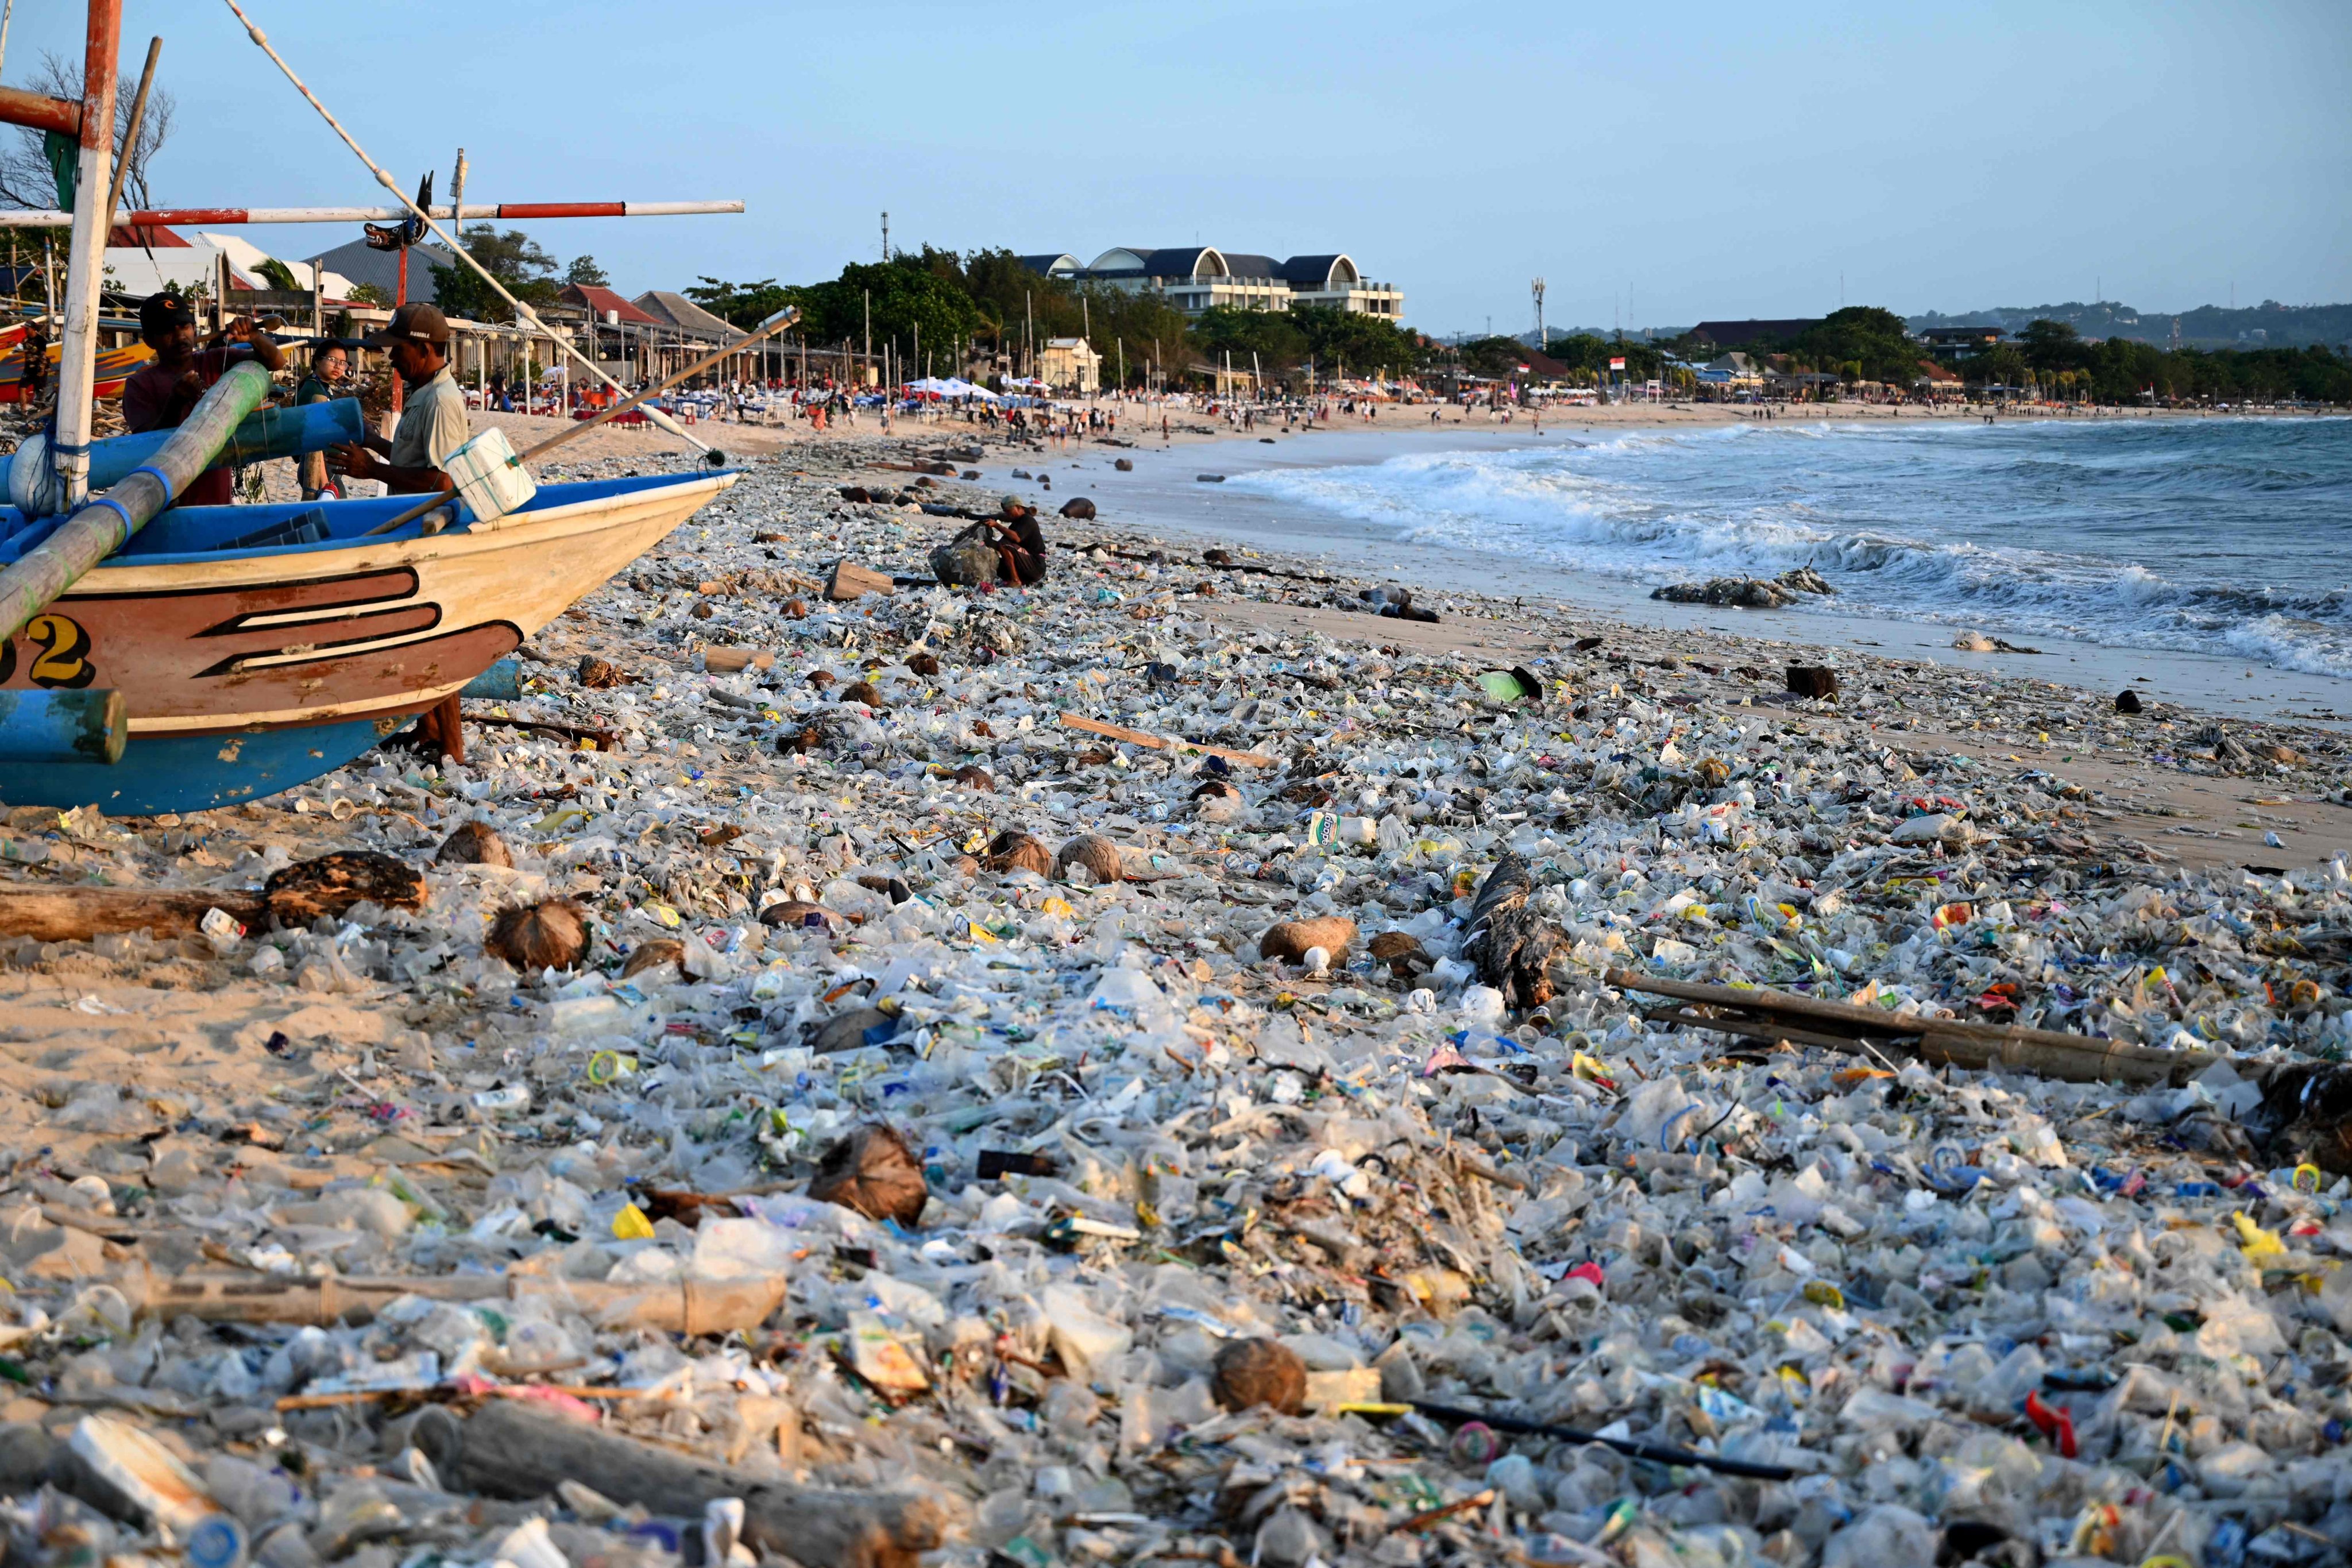 Plastic and other debris is seen washed ashore at a beach in Denpasar on Indonesia’s resort island of Bali earlier his month. Investments are needed to clean up plastic pollution and reduce greenhouse gases. Photo: AFP